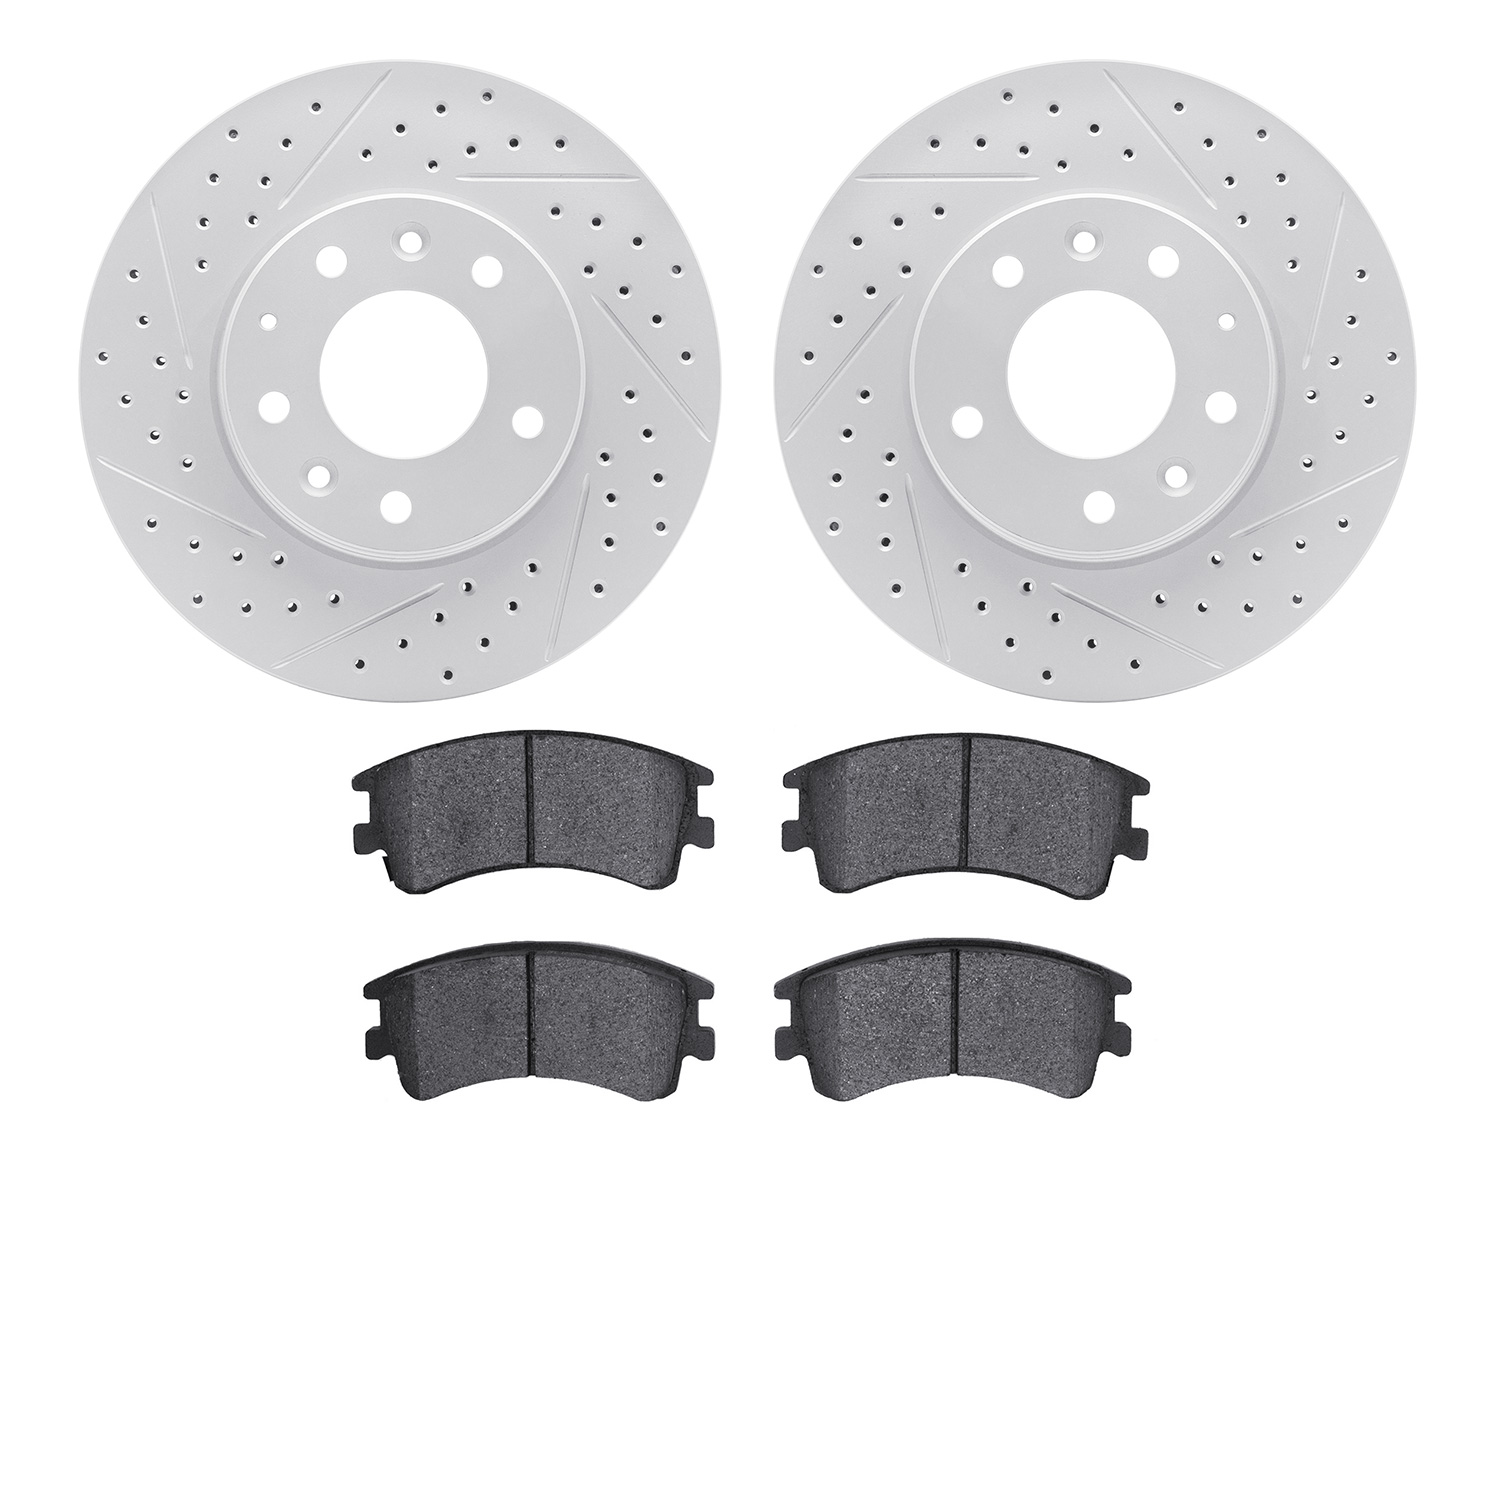 2502-80011 Geoperformance Drilled/Slotted Rotors w/5000 Advanced Brake Pads Kit, 2003-2005 Ford/Lincoln/Mercury/Mazda, Position: